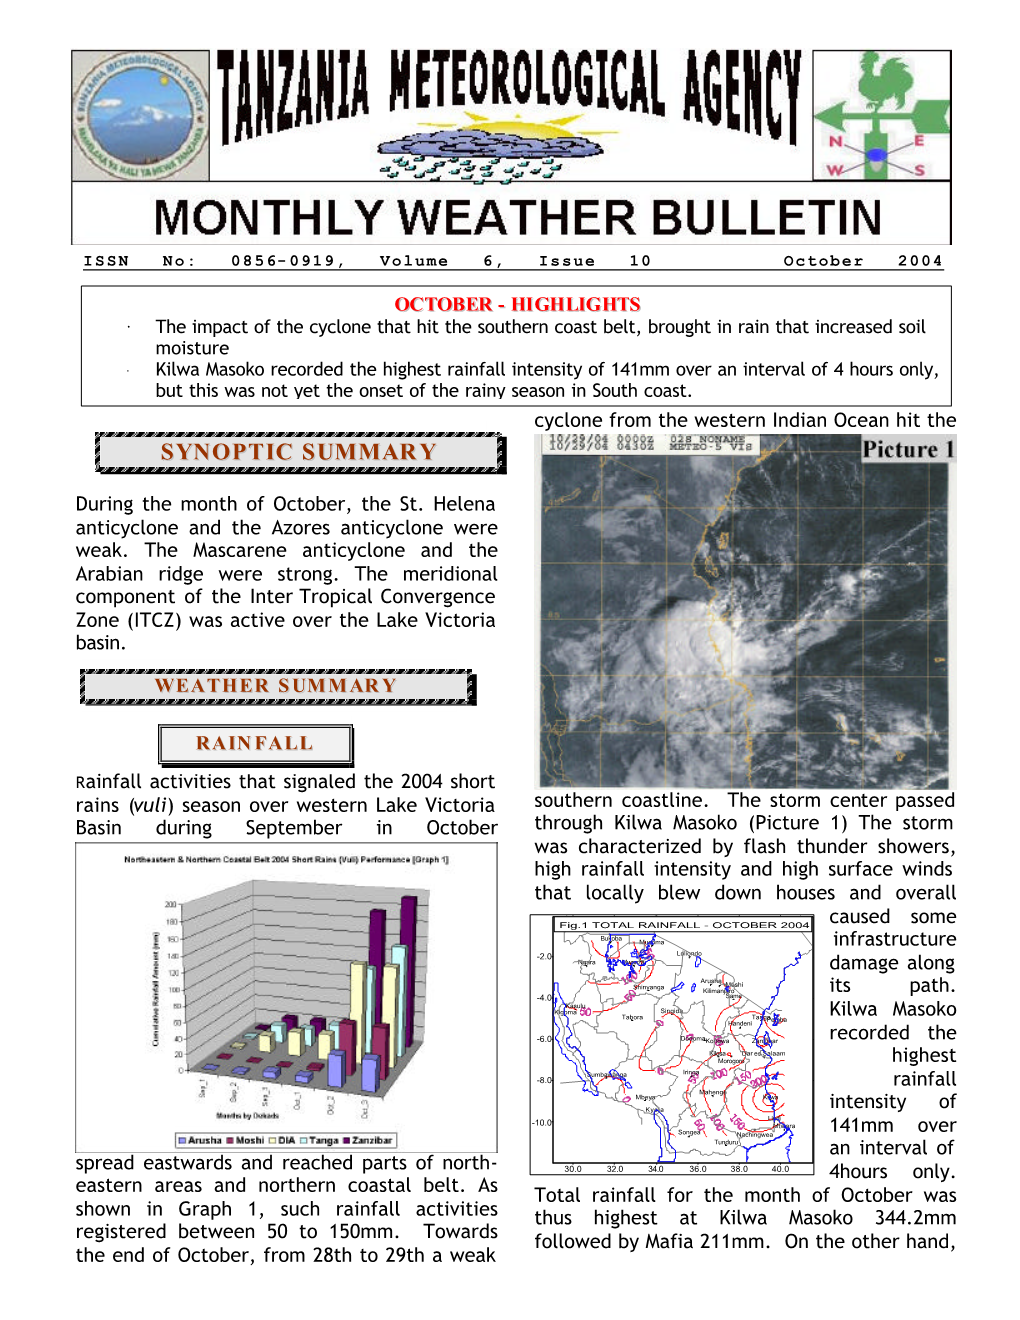 TMA October 2004 Monthly Weather Bulletin